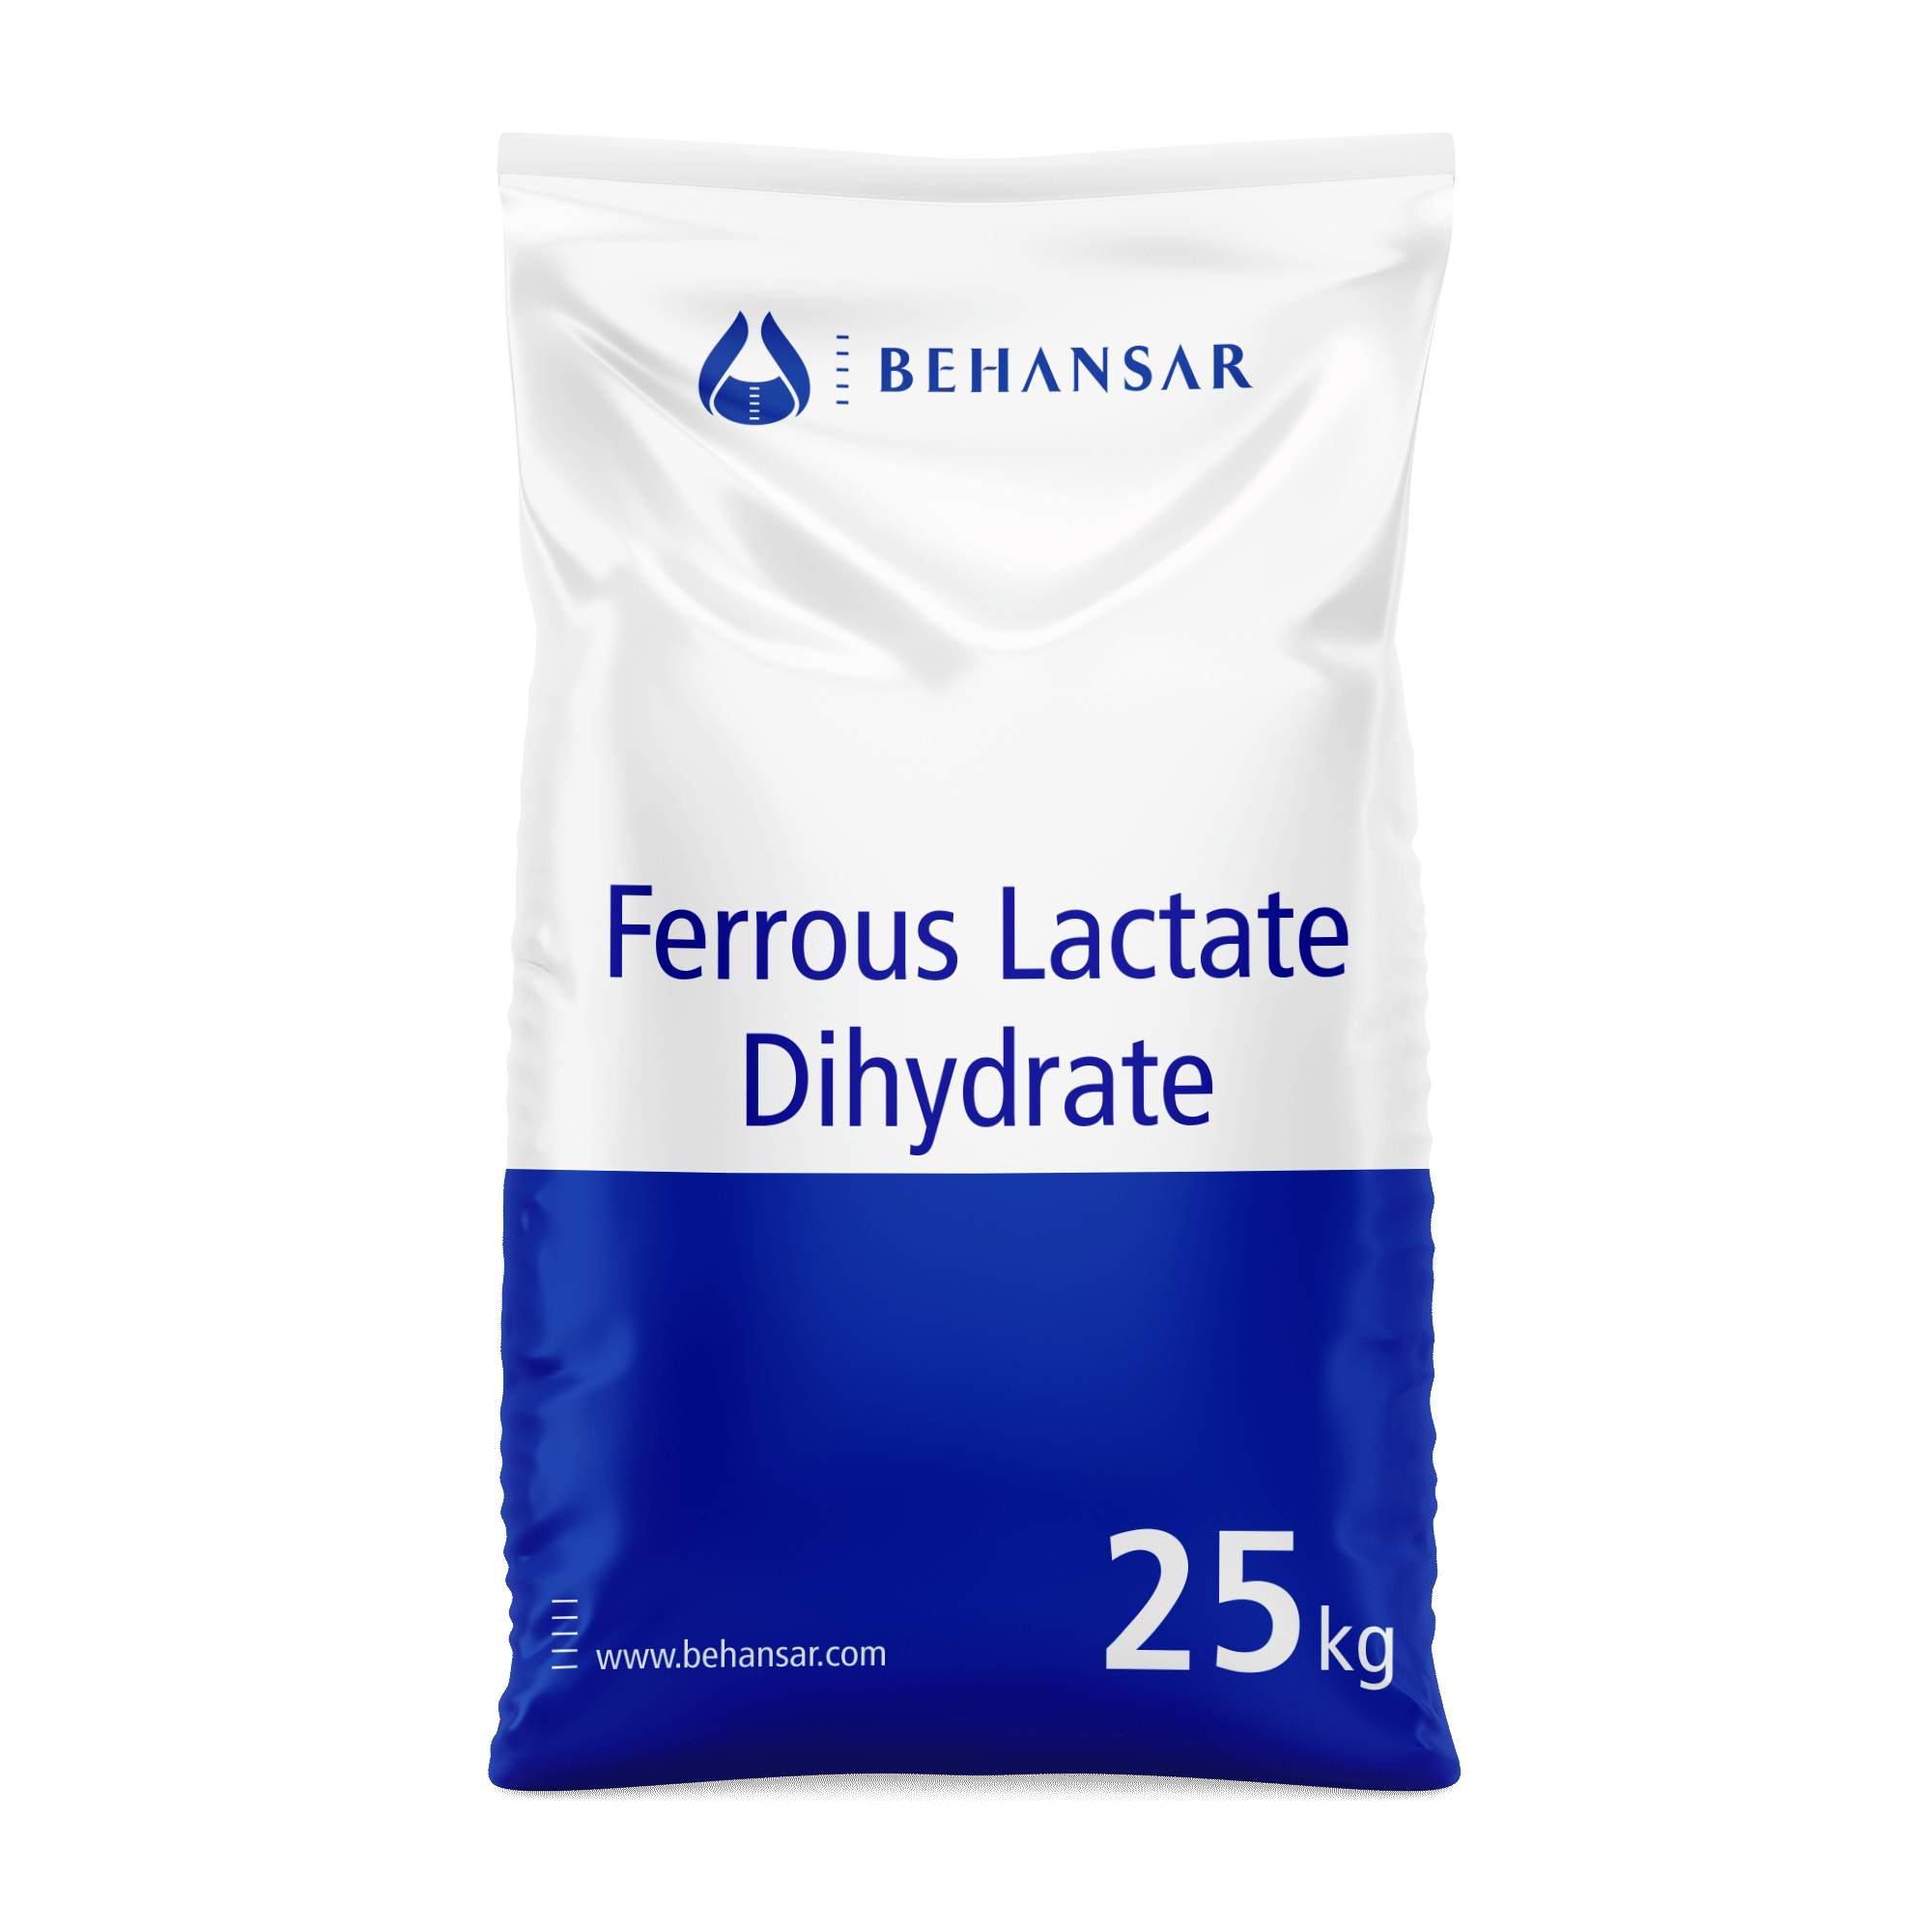 Ferrous Lactate Dihydrate is one of the products of Behansar Co